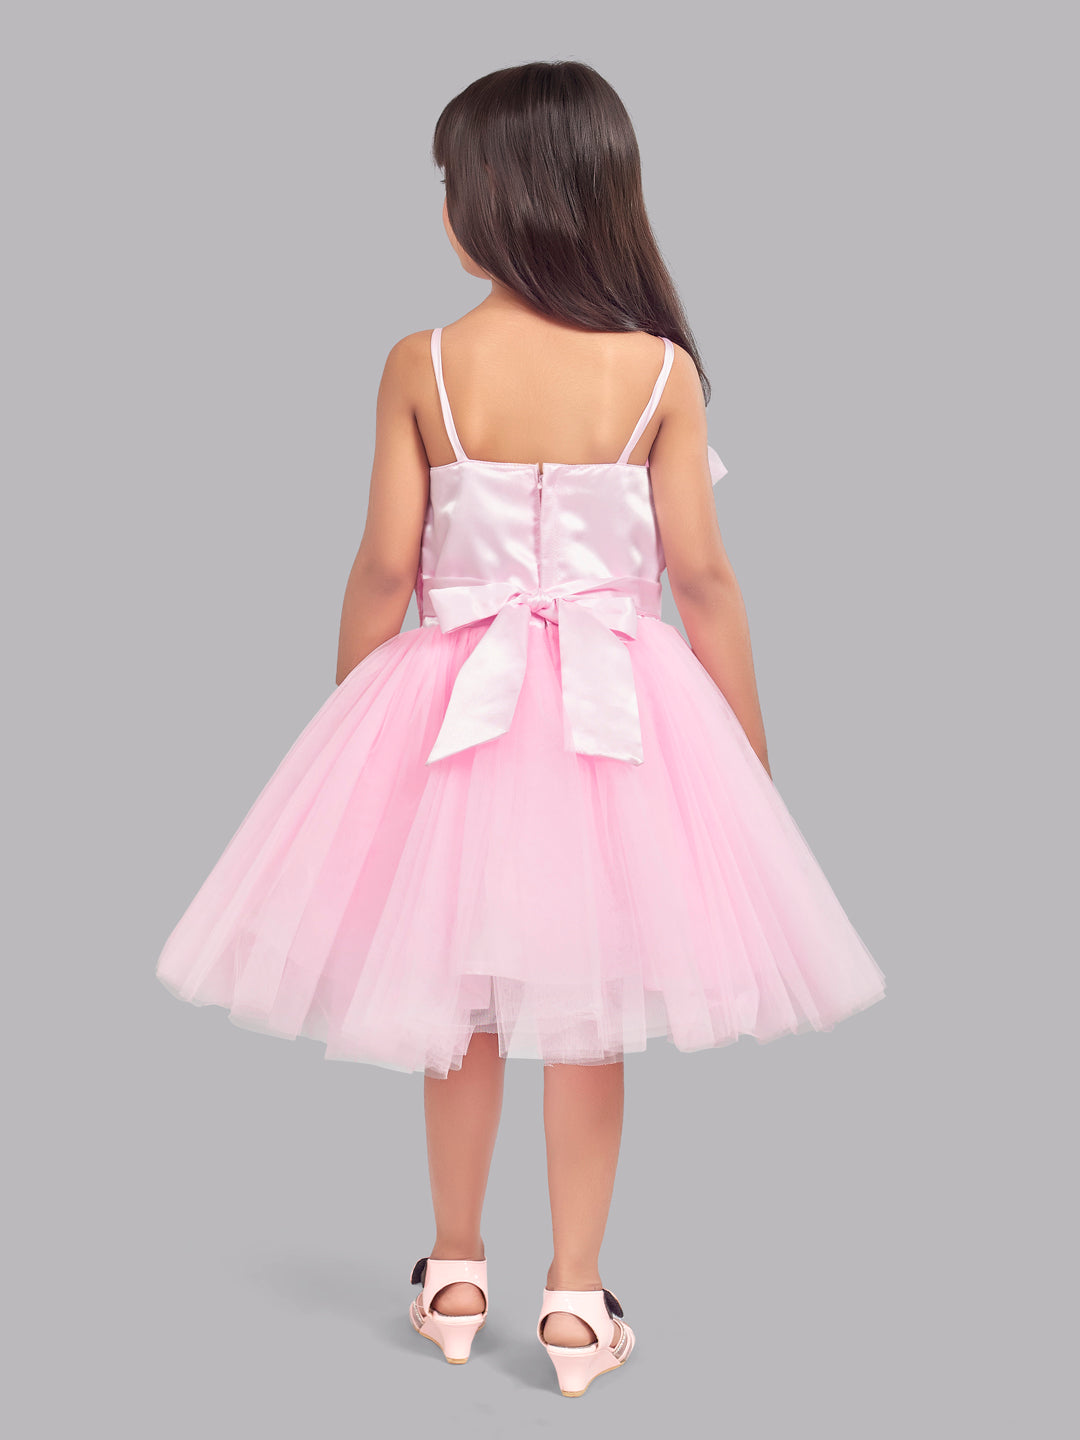 Buy Hot Pink Baby Dress Online In India - Etsy India